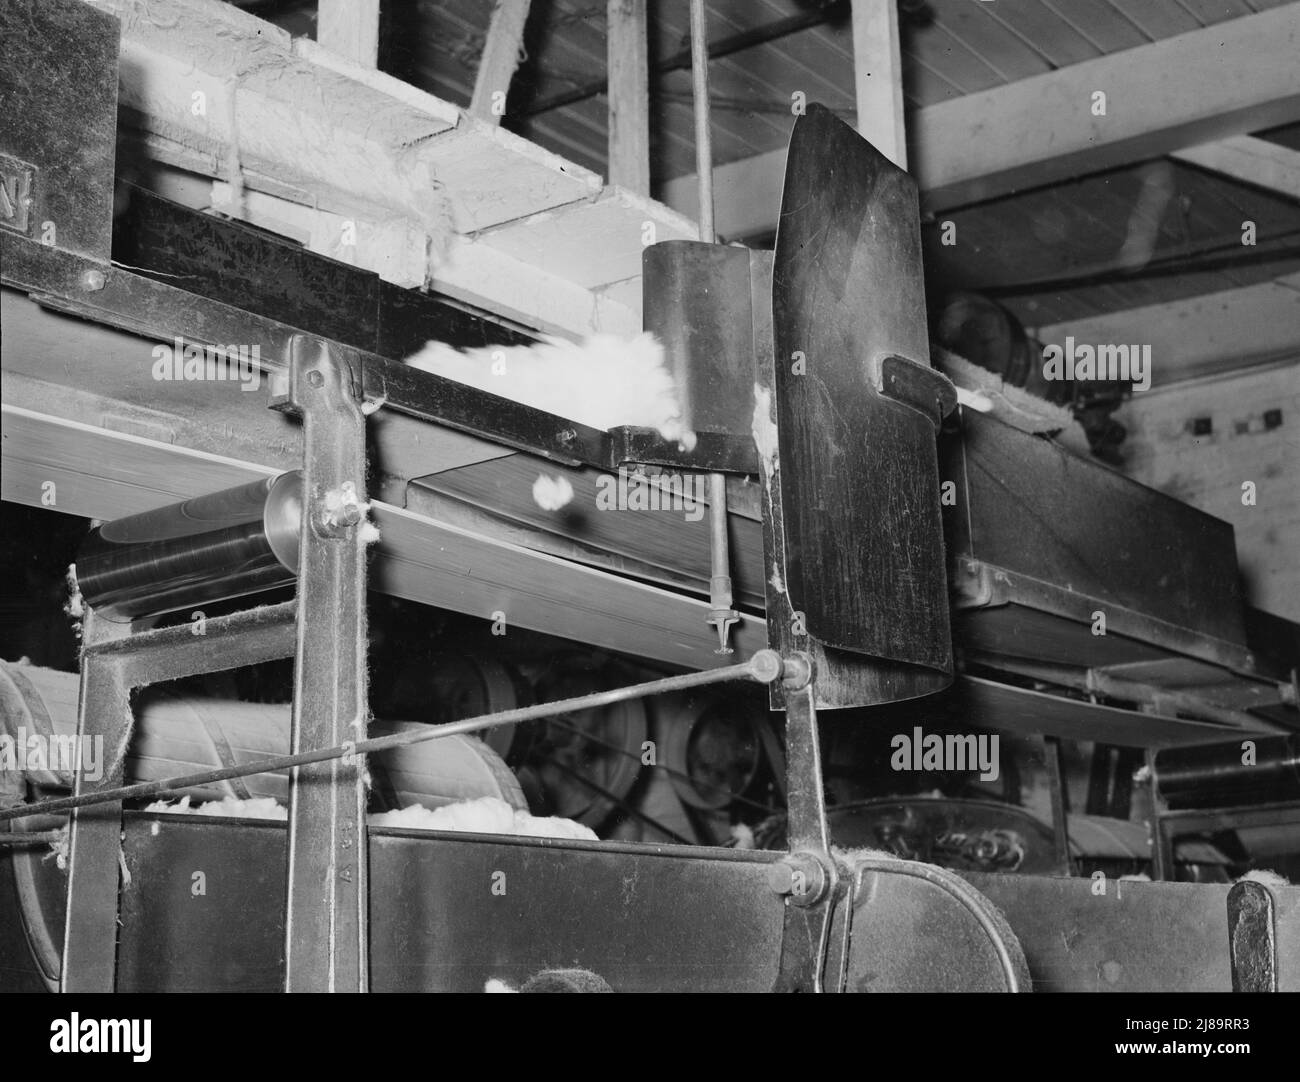 Cotton from the bale is transported by belt to machine for making cotton bats. Weighing device is so sensitive that it directs the cotton from one machine to another. Laurel, Mississippi. Stock Photo